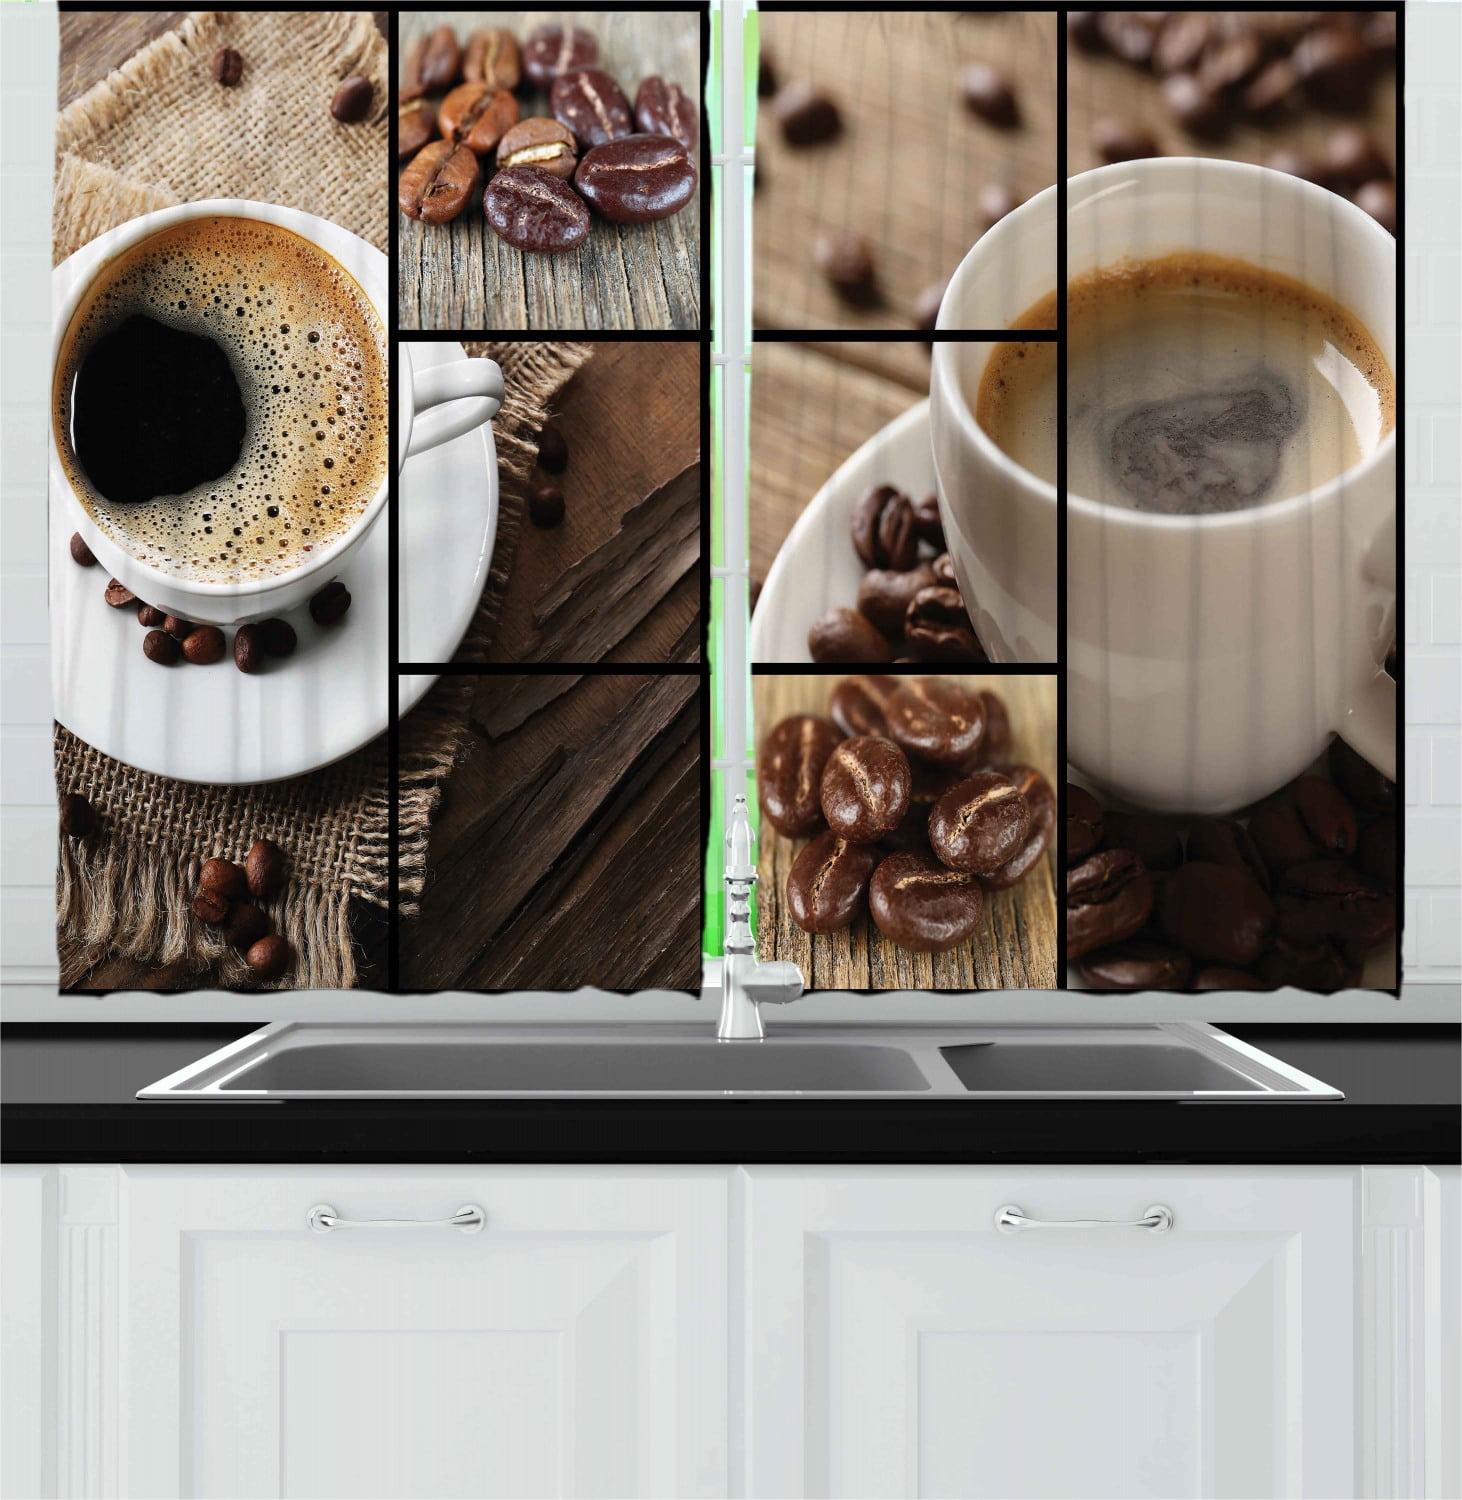 KFUTMD Roman Shades Kitchen Collage of Different Coffee Details on Wooden Table Mugs Beans Organic Concept Brown Black Tan Tie Up Curtains for Windows 23x64 Inch